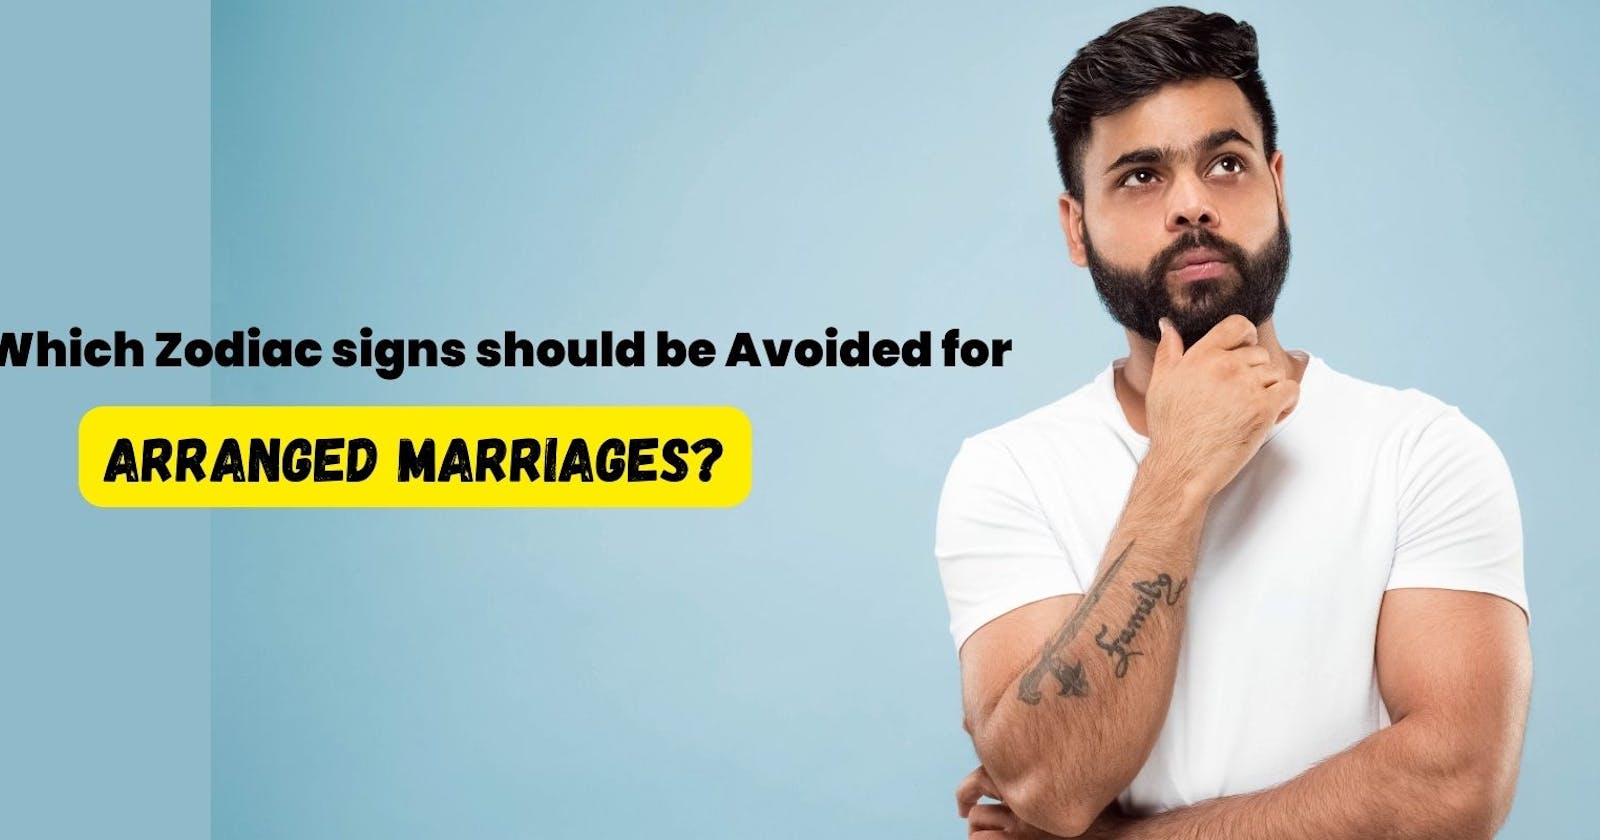 Which zodiac signs should be avoided for arranged marriages?